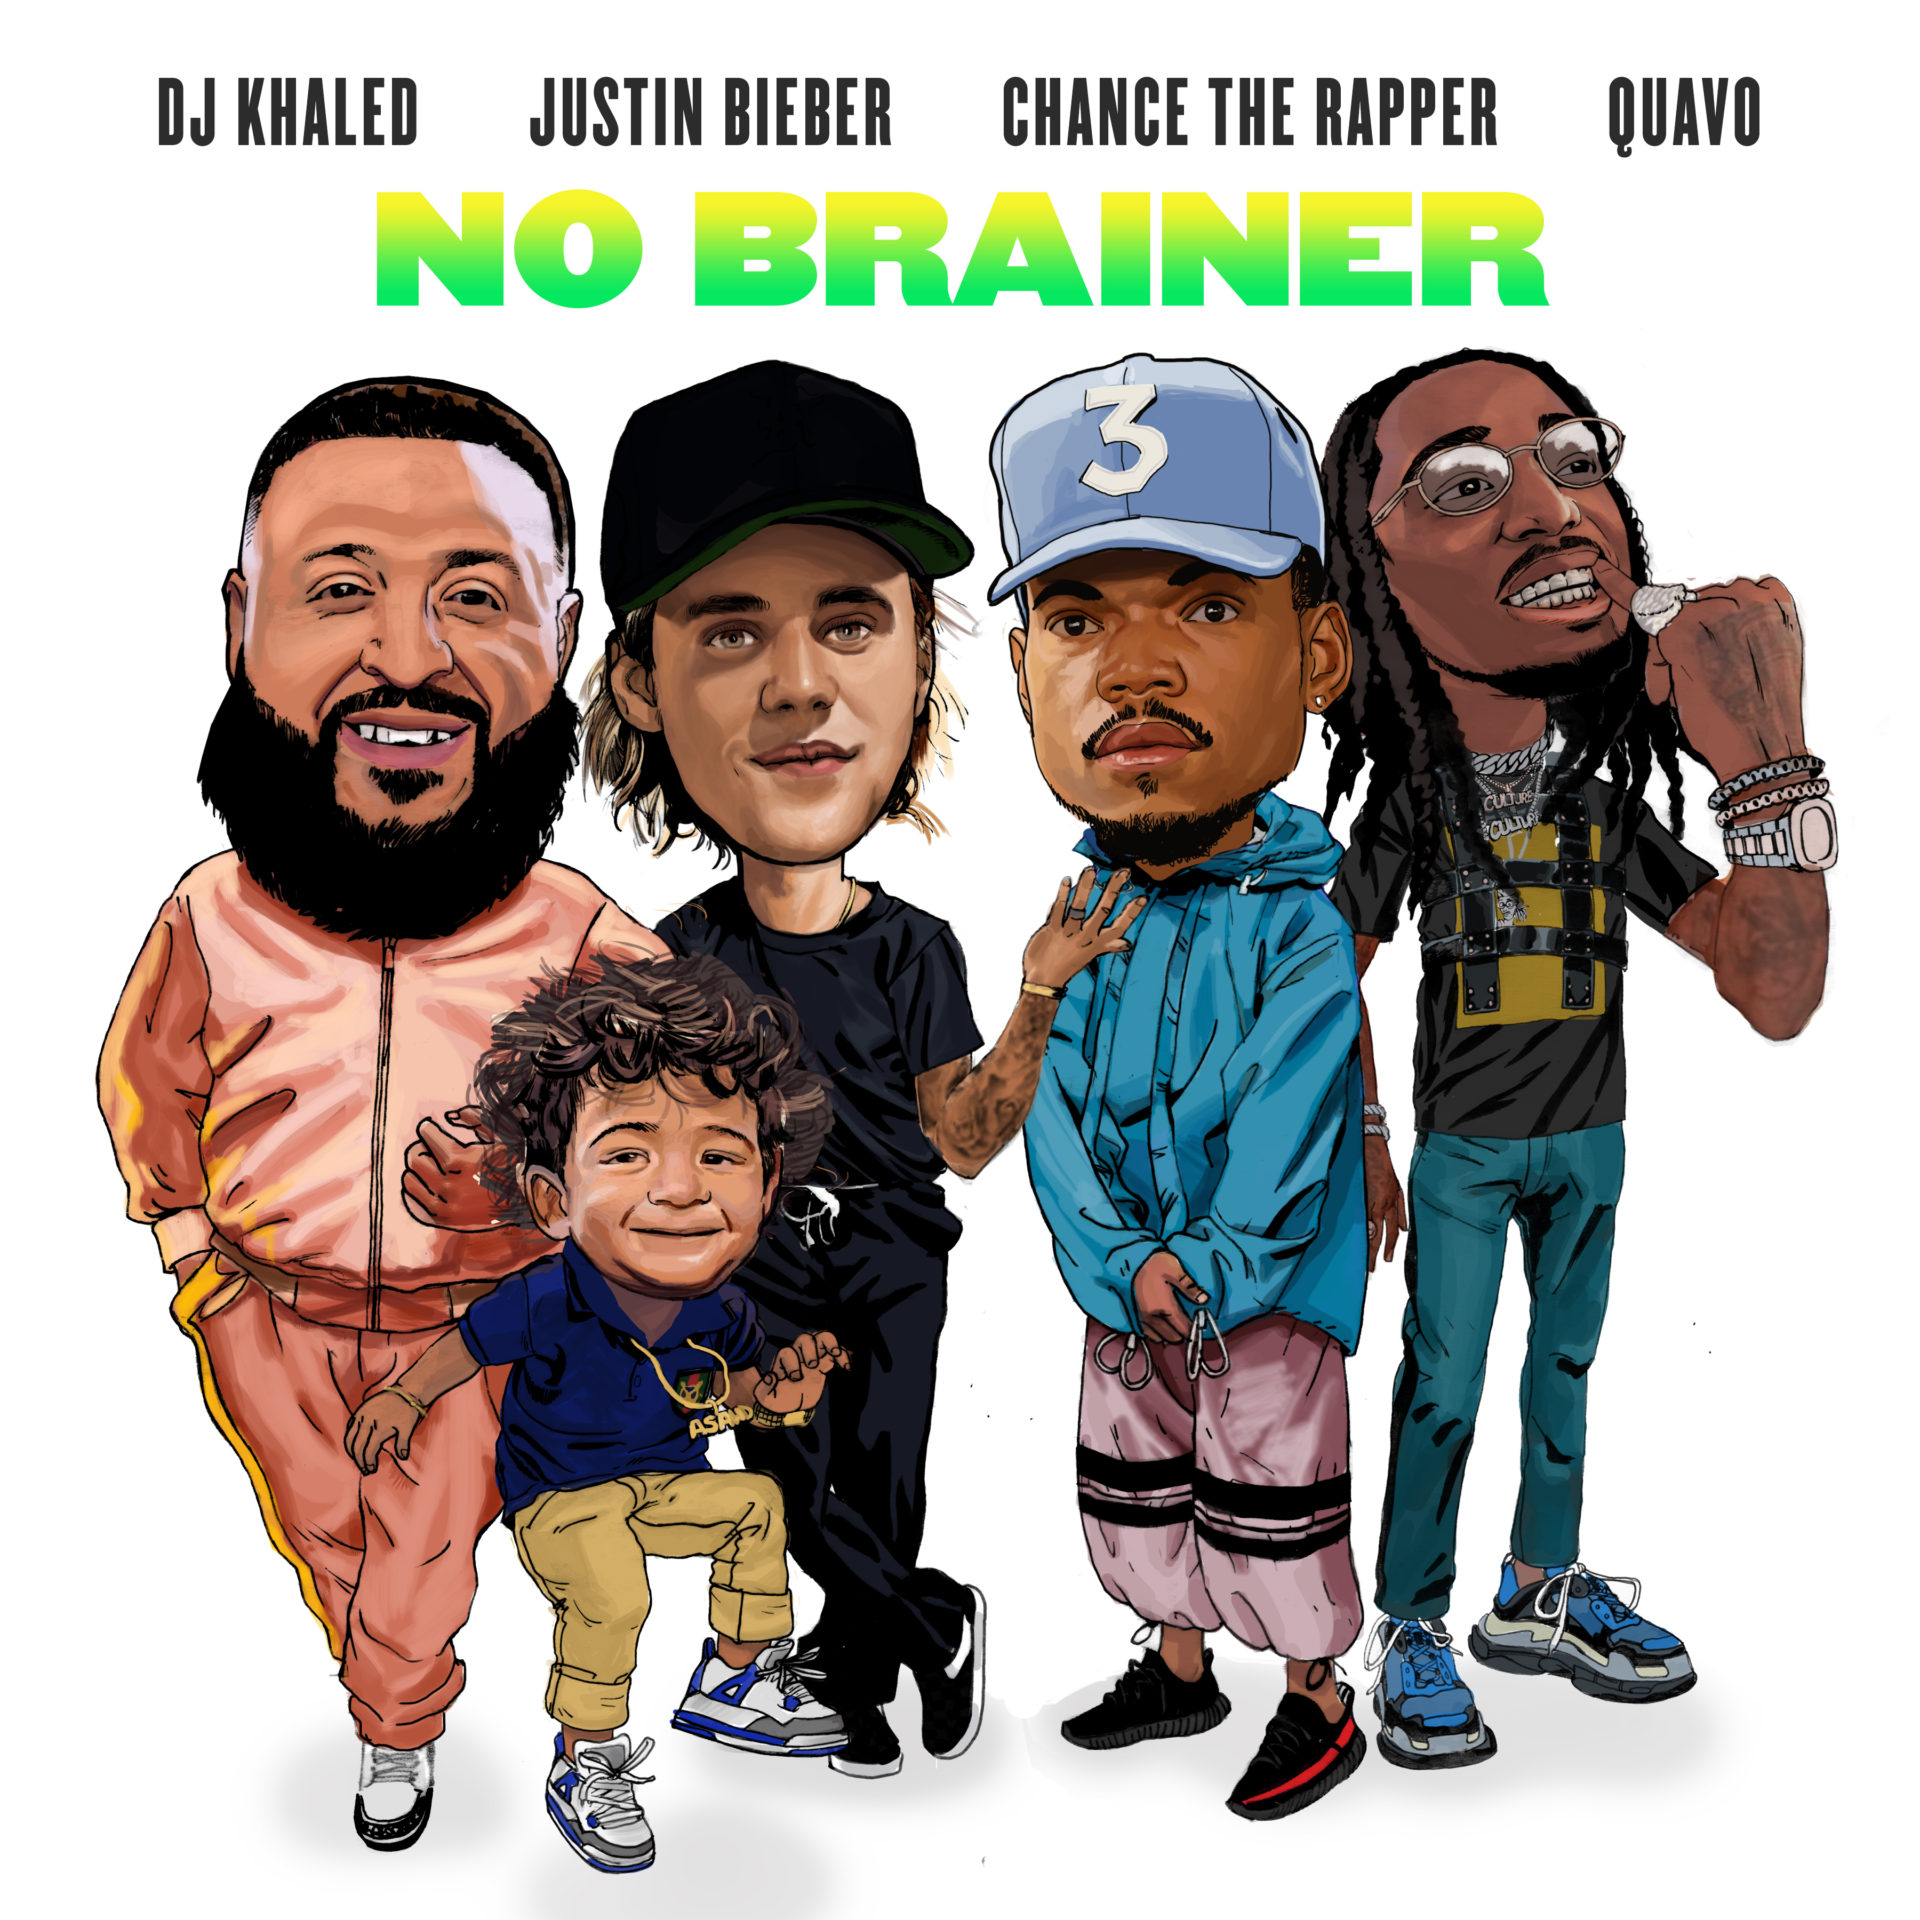 DJ Khaled with people drawing